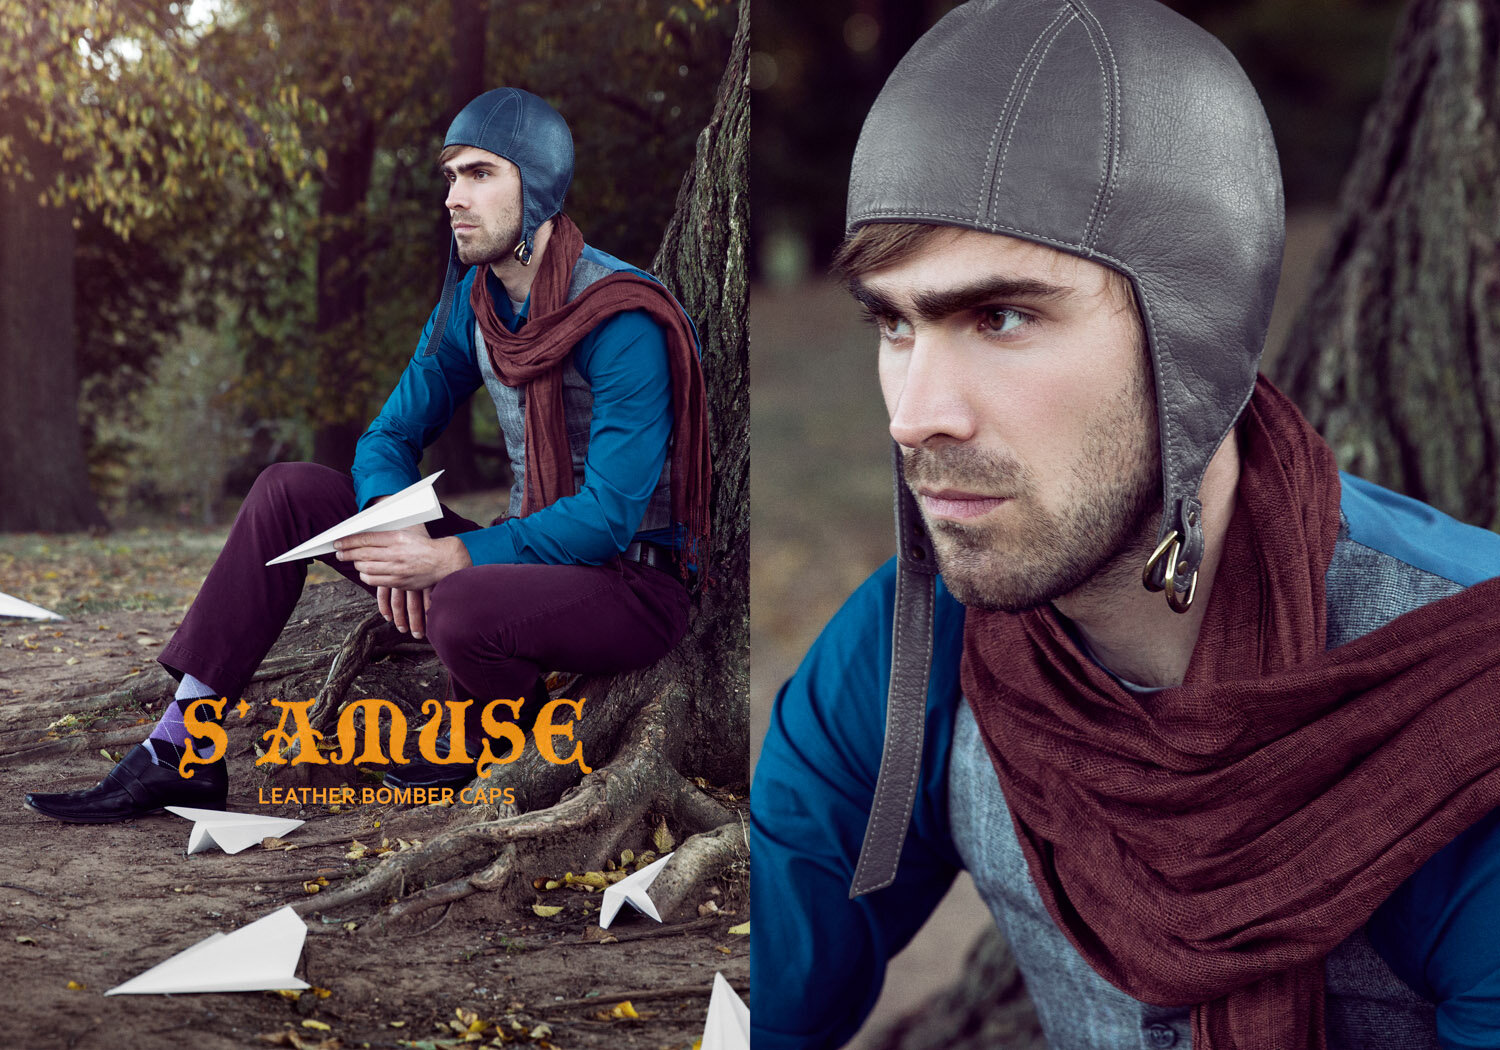 aviation themed conceptual product campaign for S'AMUSE leather bomber caps